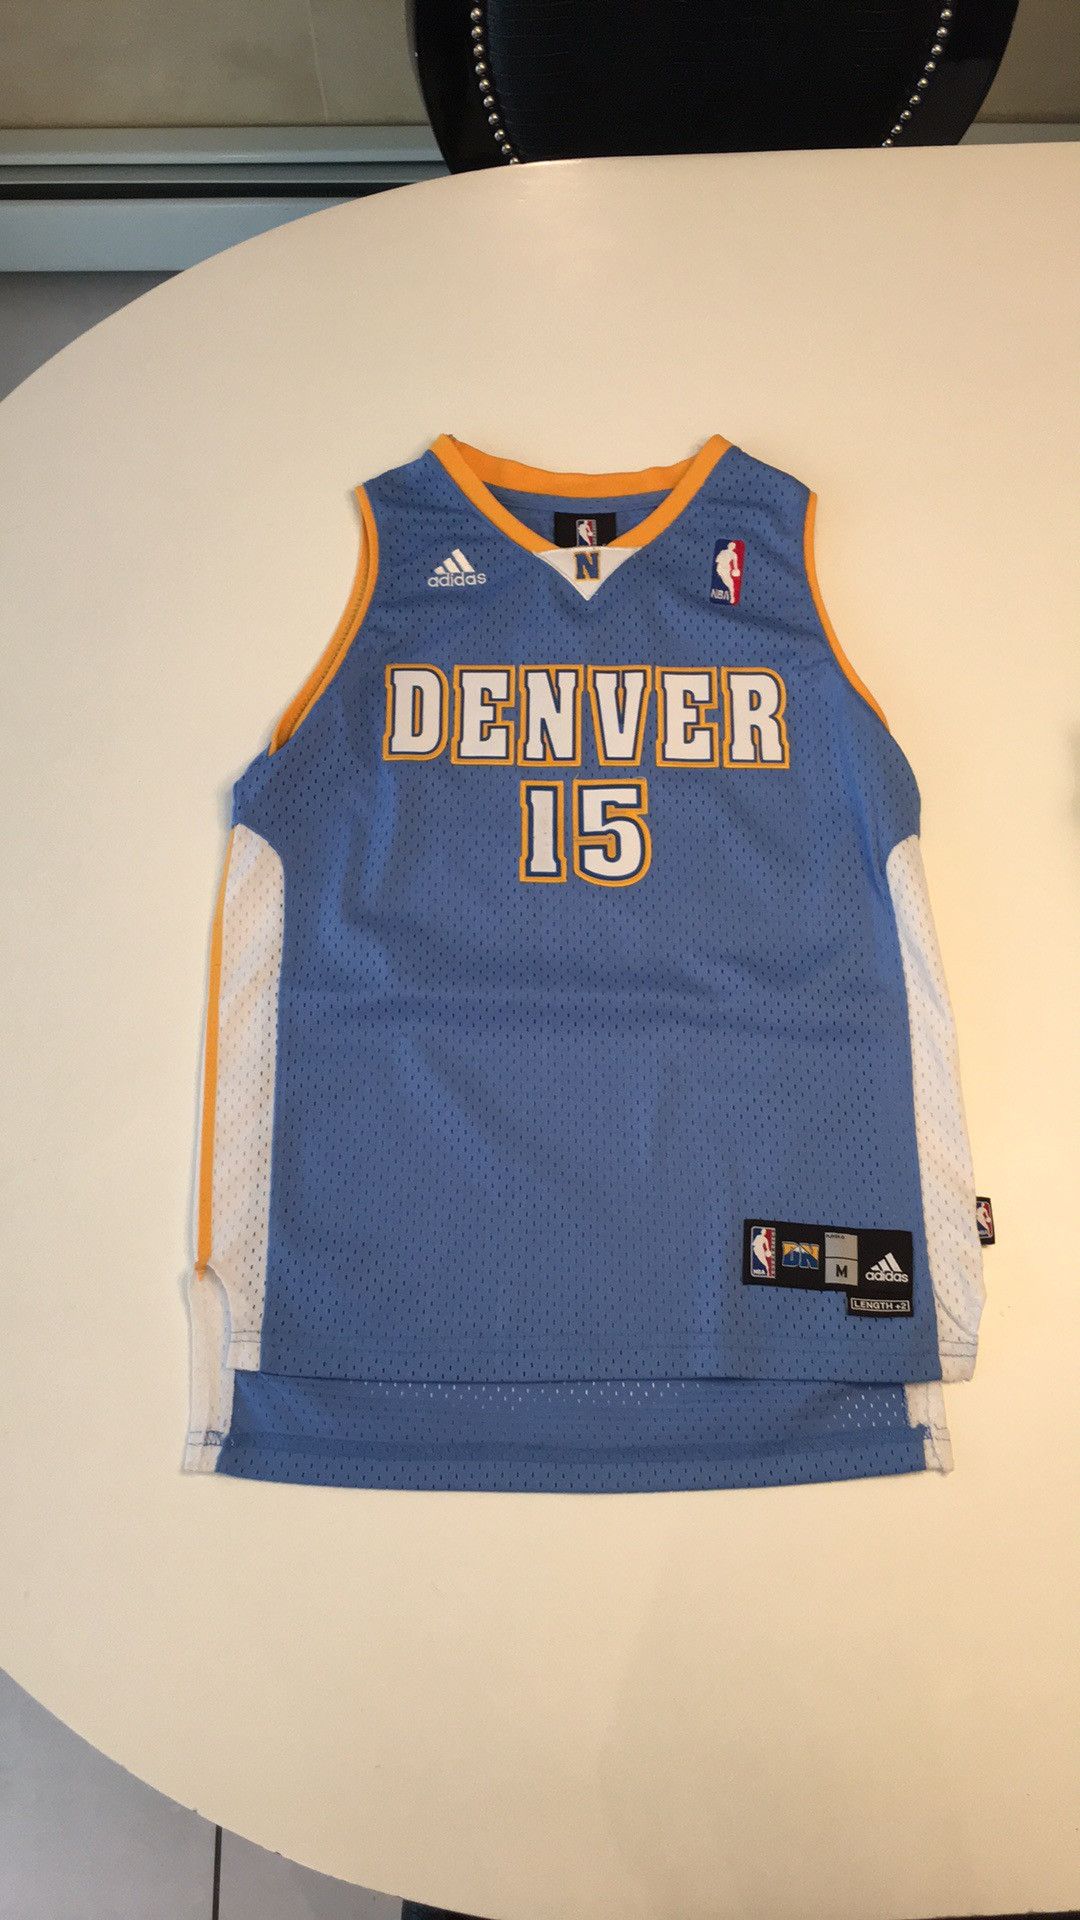 Adidas Carmelo Anthony NBA Jersey Denver Nuggets Youth M Vintage Size US XXS / EU 40 - 1 Preview